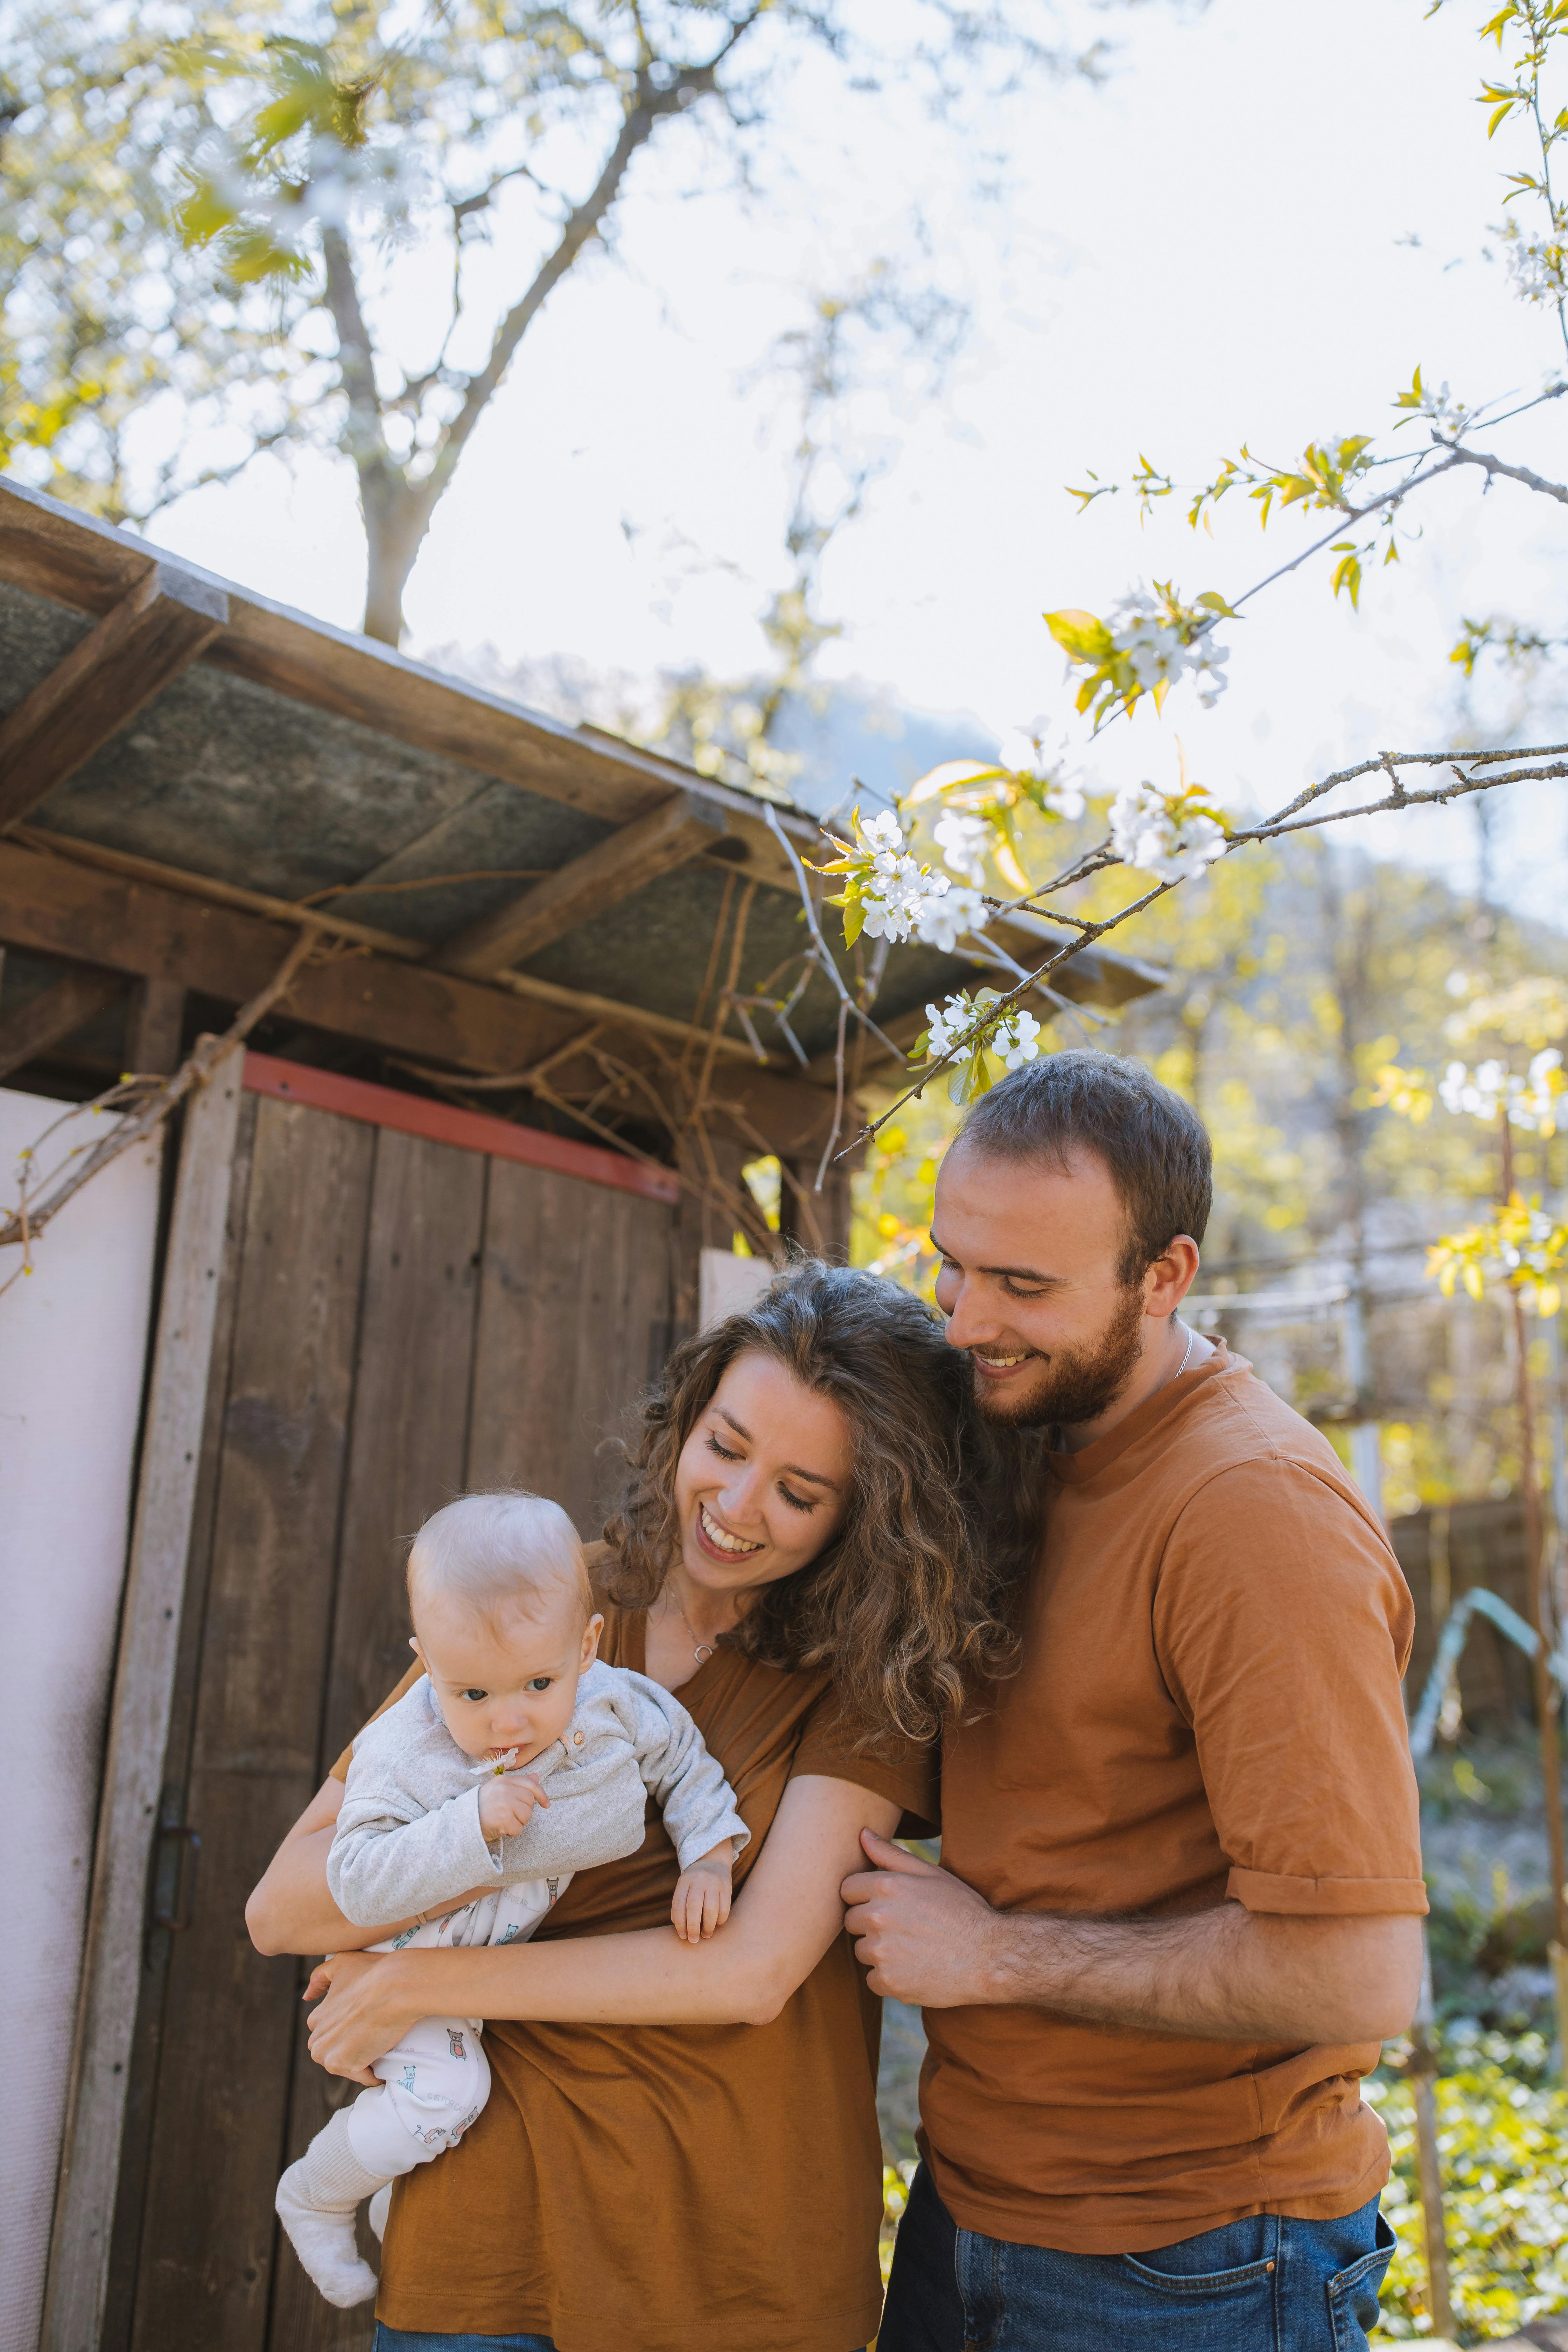 Happy family with a baby | Source: Pexels